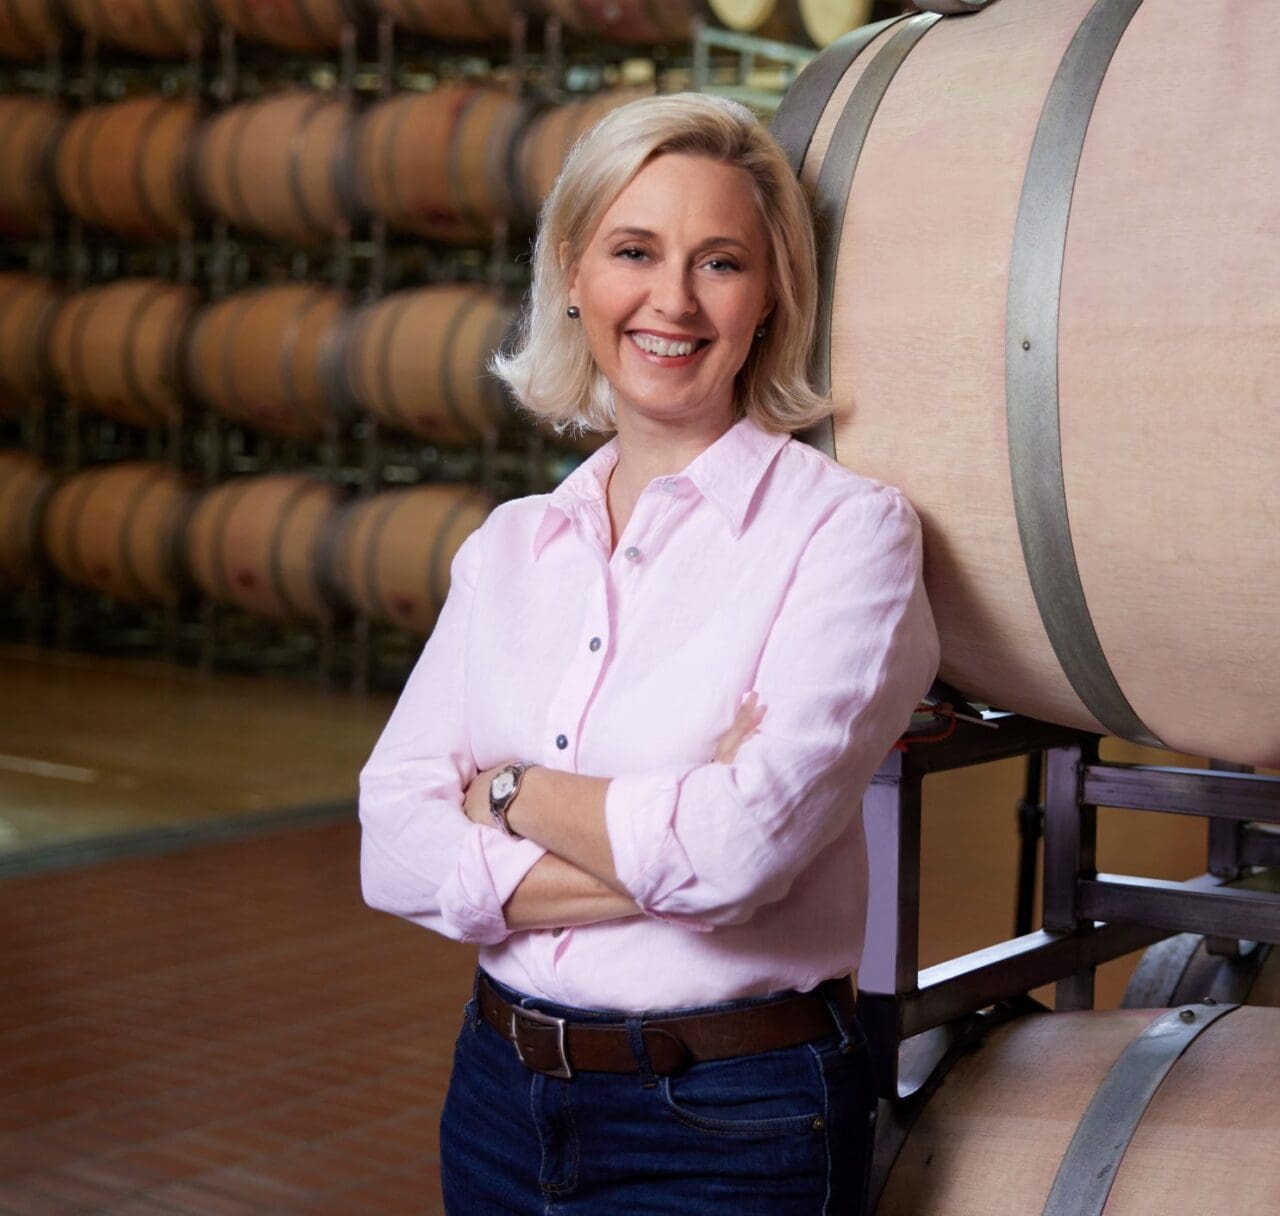 How to become a Winemaker - Salary, Qualifications, Skills